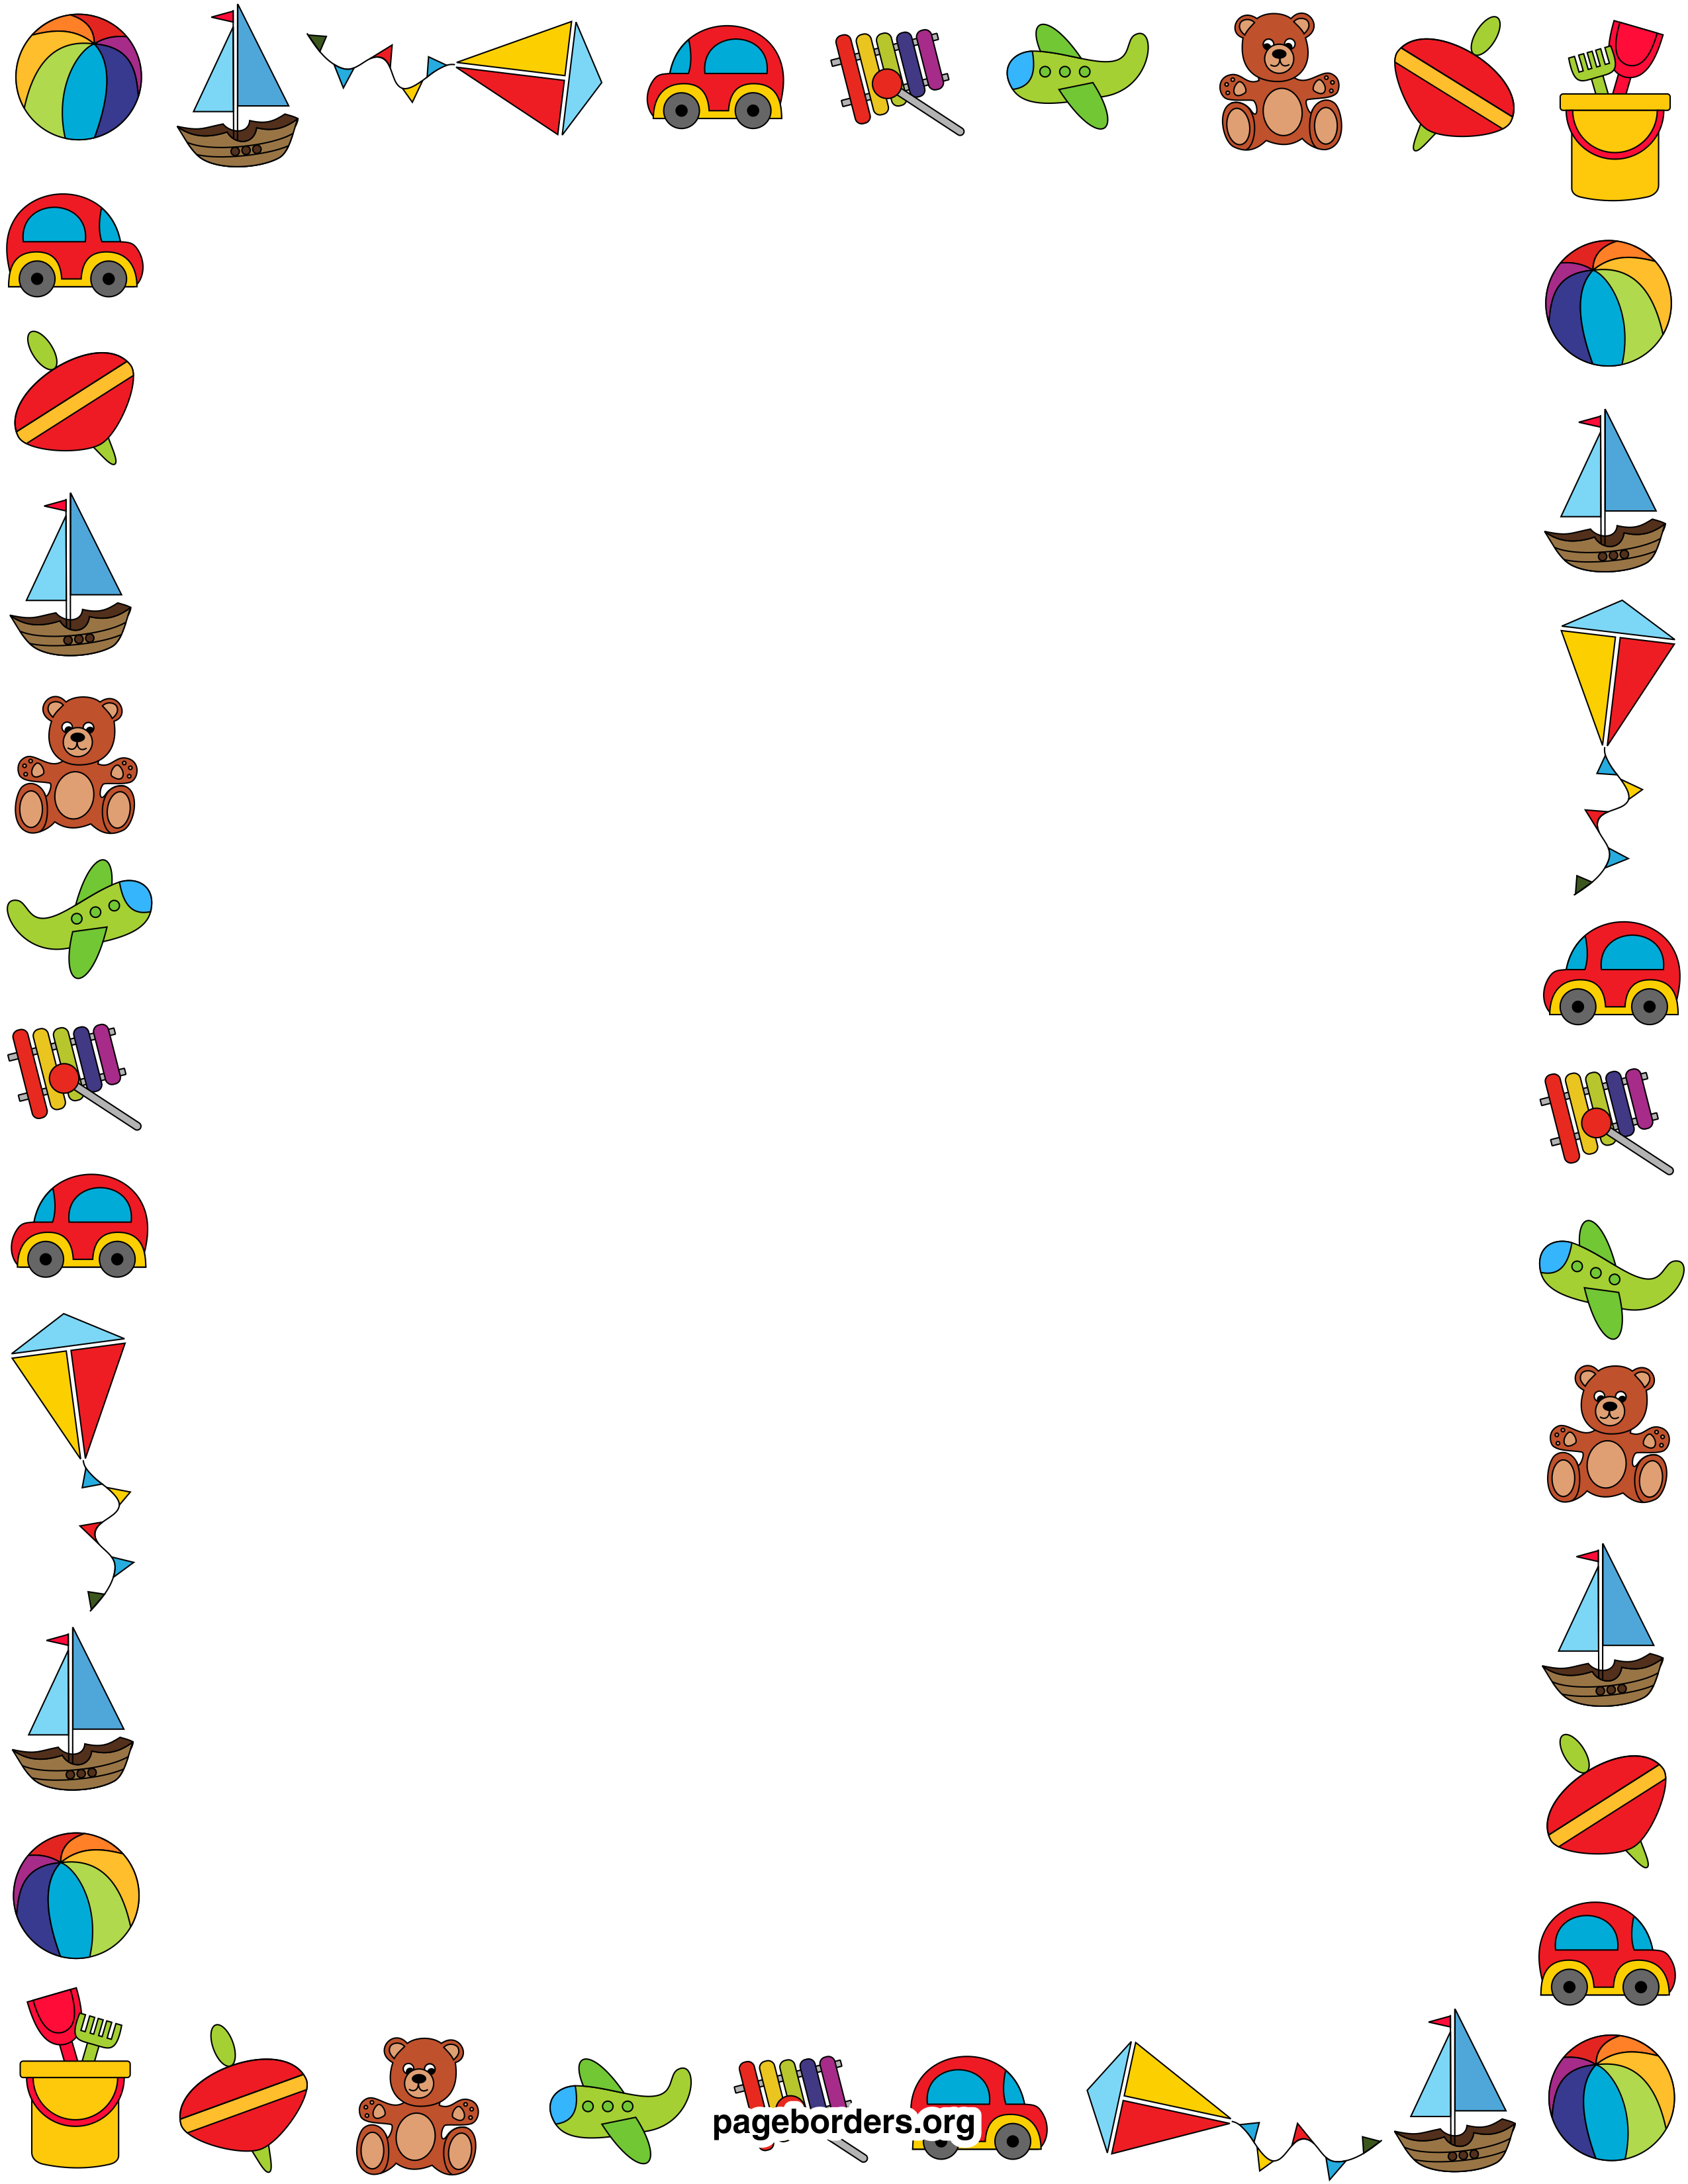 clip art borders for word 2010 - photo #28